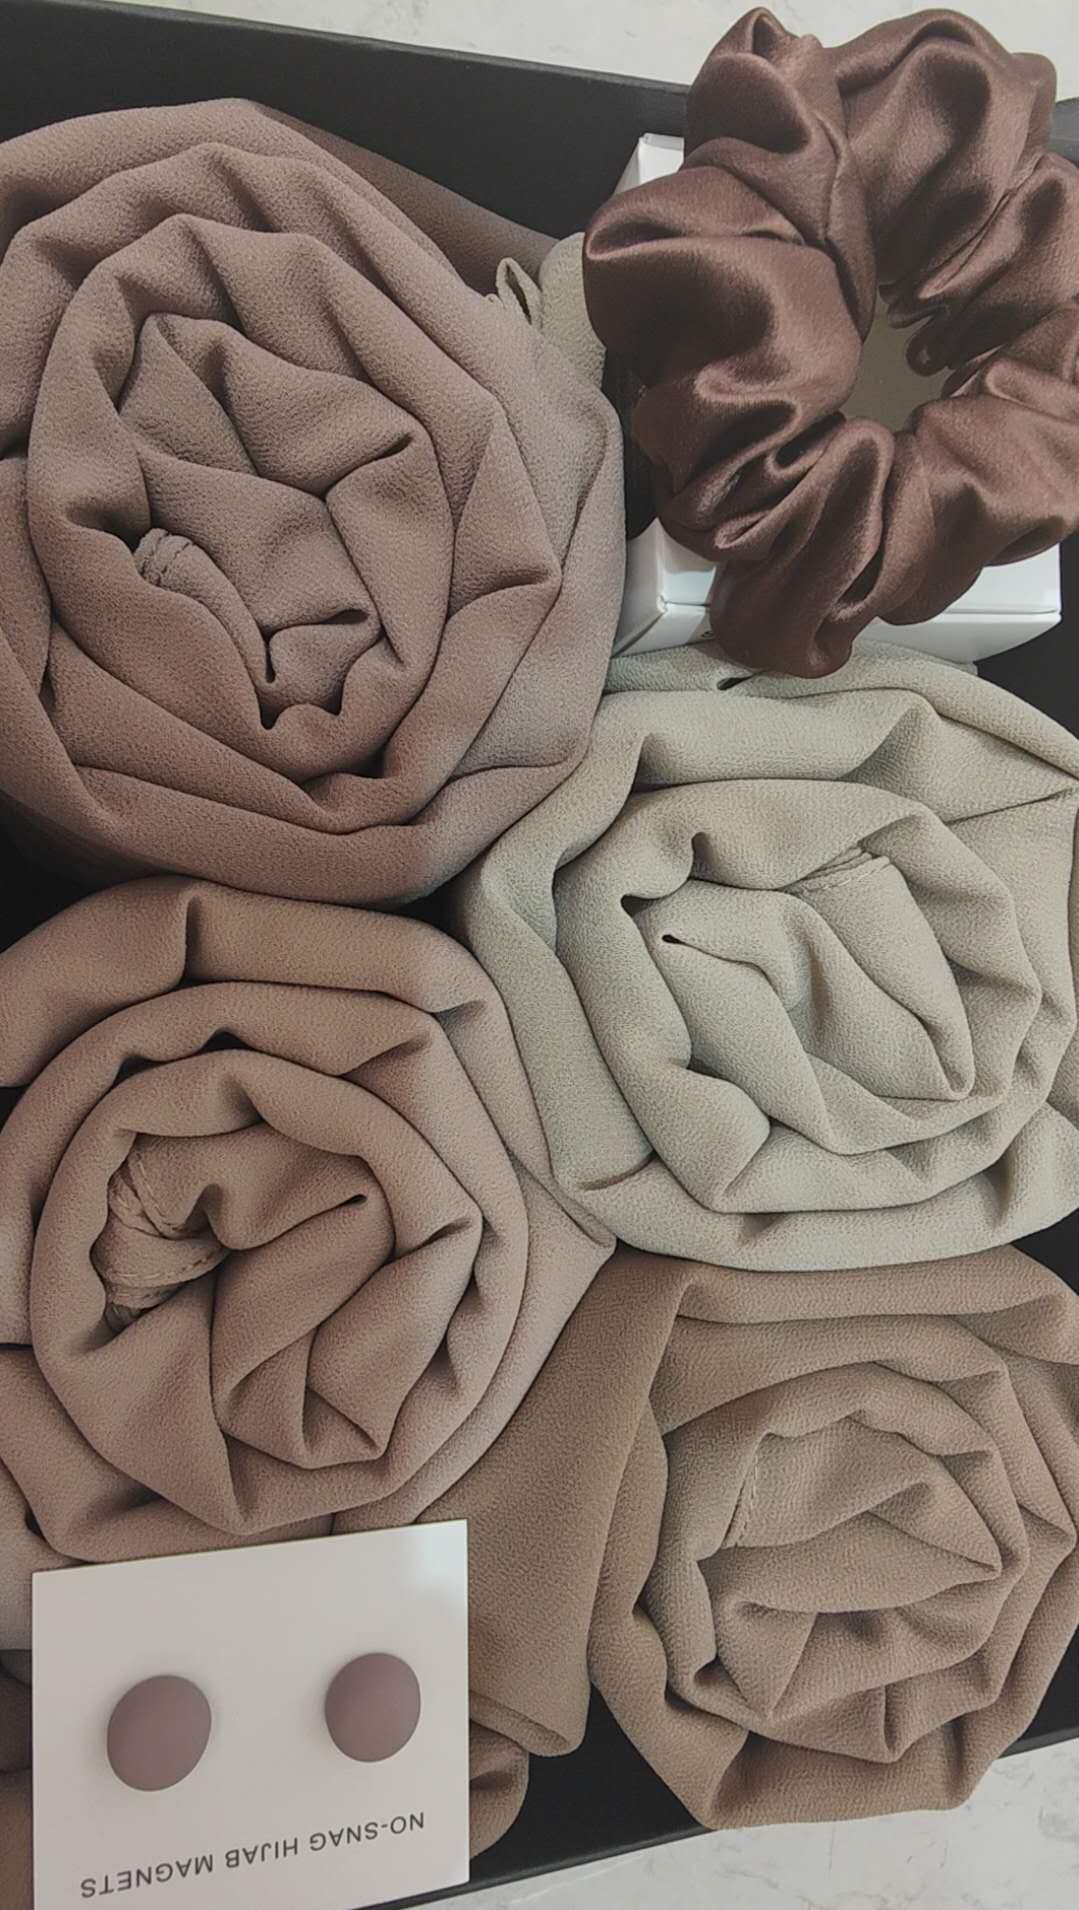 Indulge in the luxury of Hikmah Boutique's Chiffon Hijab Gift Box - The Tan Set. This gift box is the perfect style of sophistication, style and elegance. This set includes 4 premium quality chiffon hijabs in the most versatile colors of light taupe, chocolate, Desert Palm and Almandine, to suit every mood. Perfect Gift!